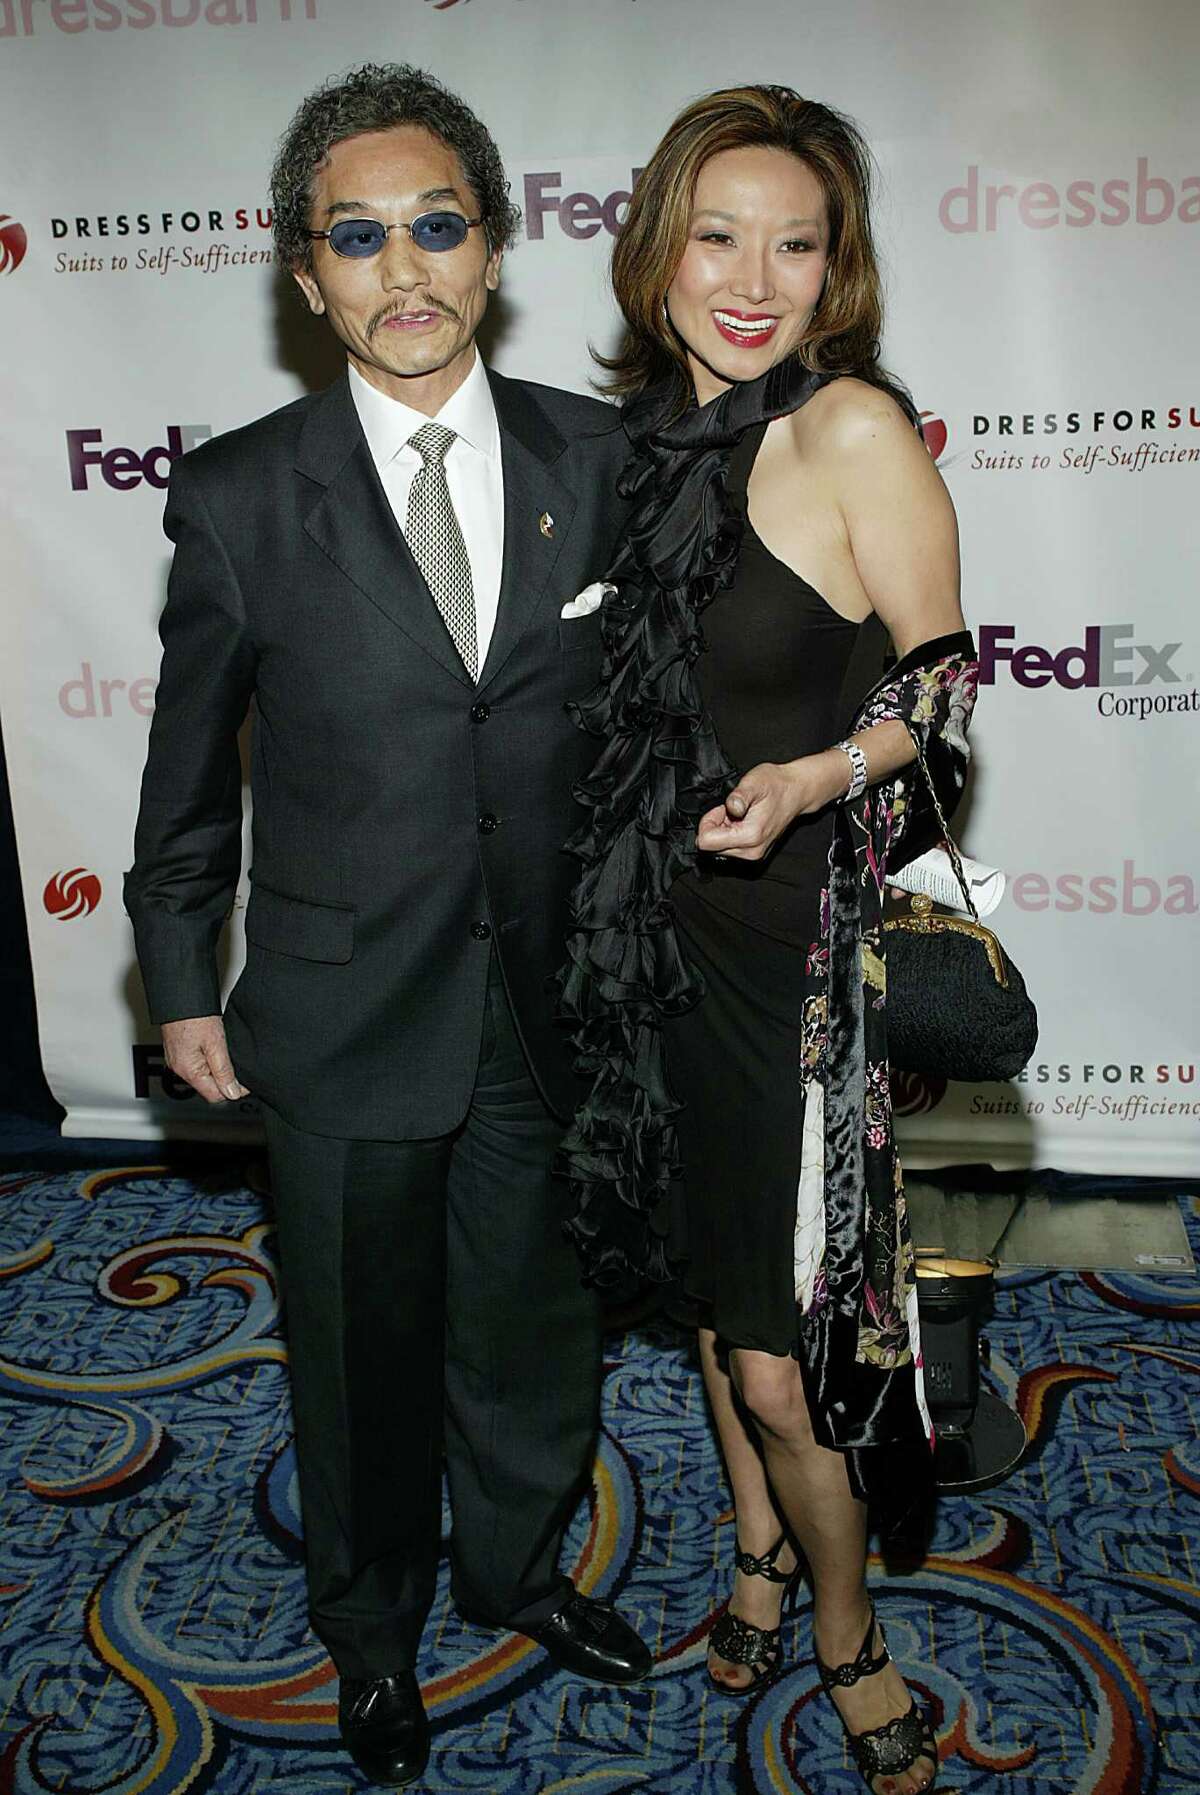 Rocky H. Aoki founder of Benihana and Keiko during "Dress for Success" Honors Star Jones - April 3, 2006 at Marriott Marquis Hotel in New York City, New York, United States. (Photo by Bennett Raglin/WireImage)